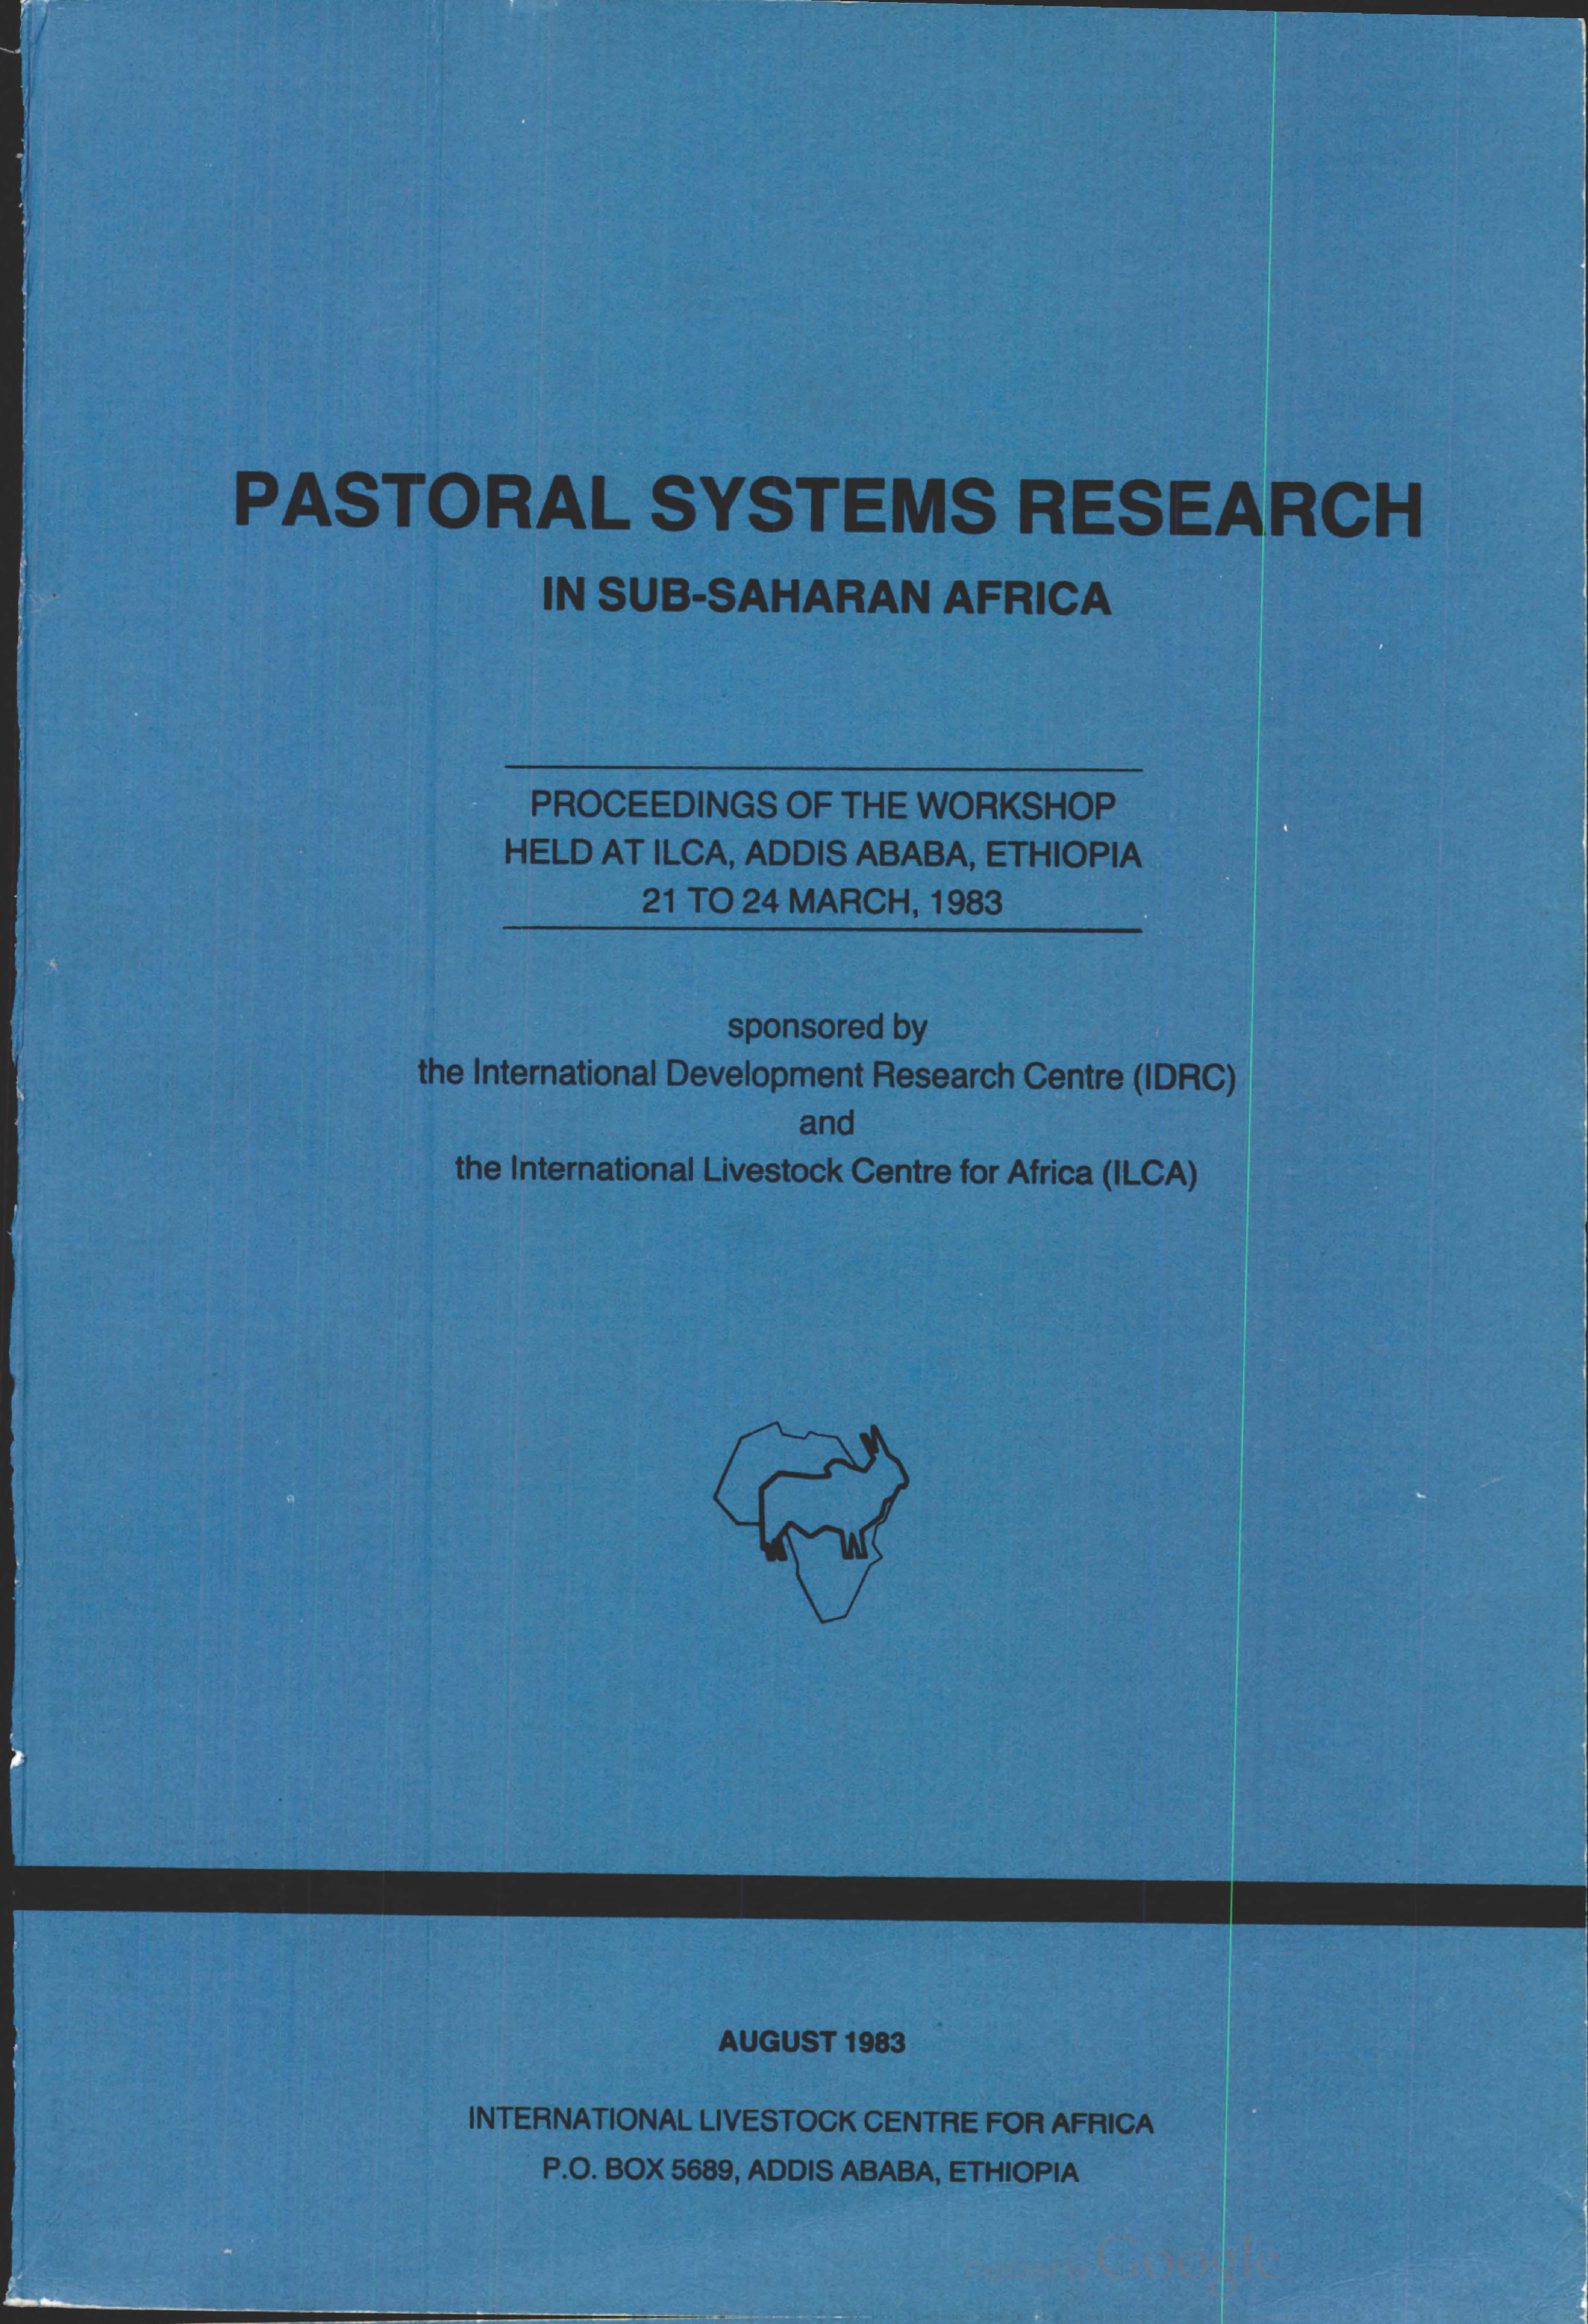 Design and testing procedures in livestock systems research: An agro-pastoral example